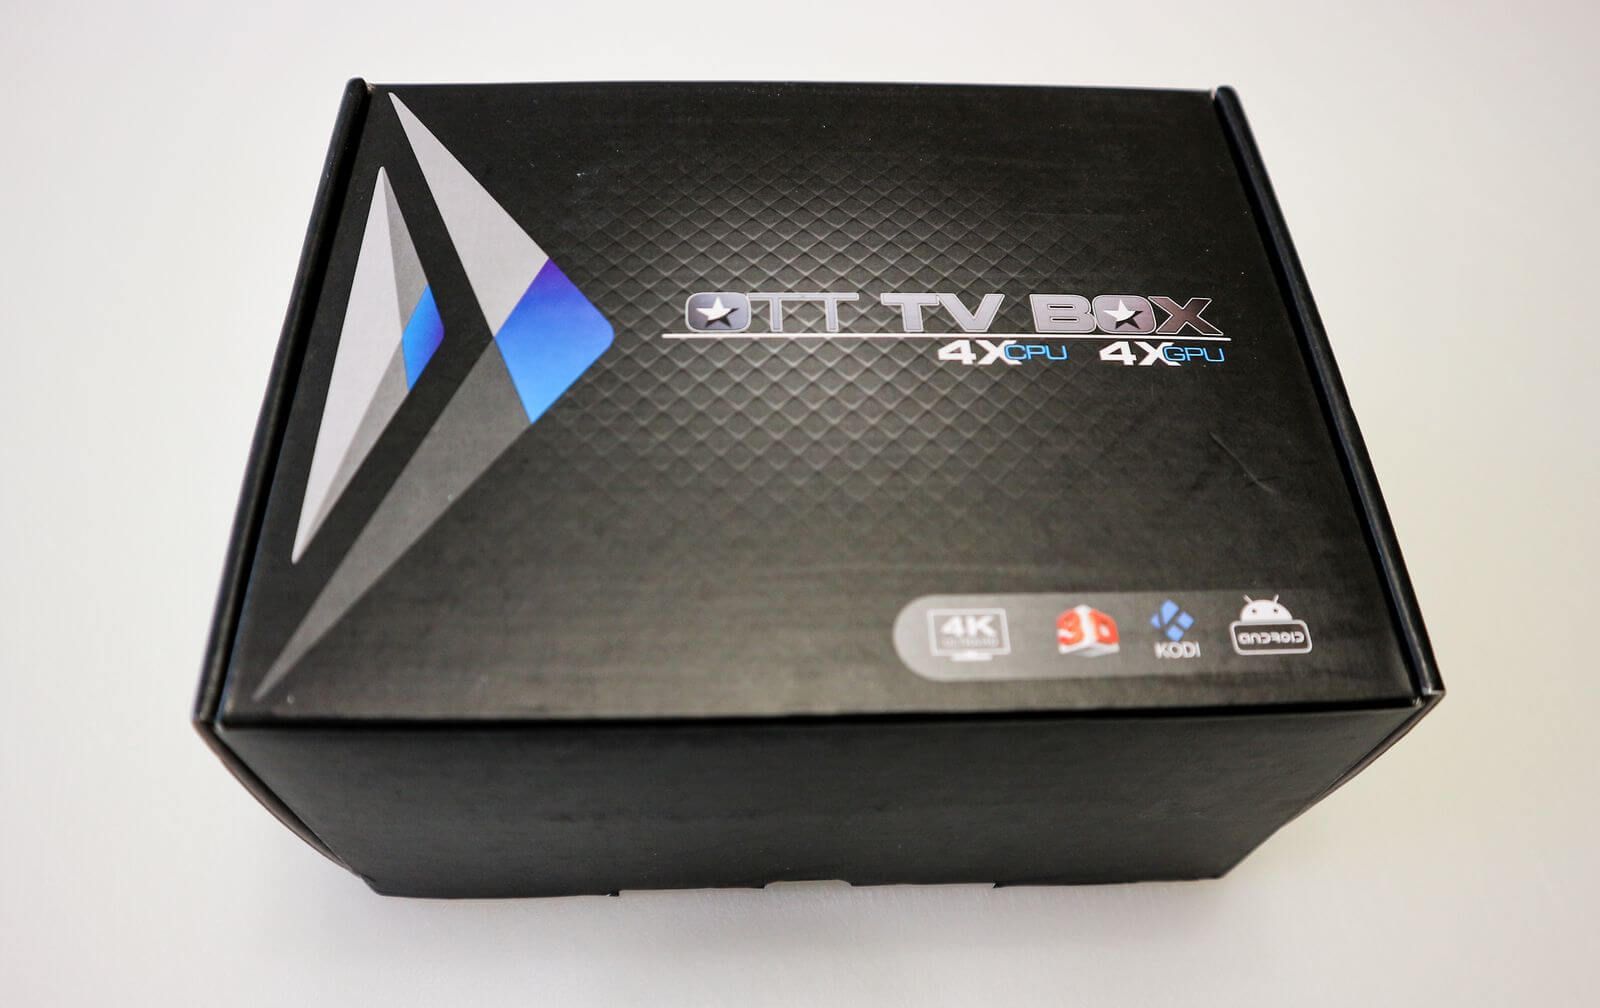 Review SCISHION V88: very cheap TV box with Android 5.1